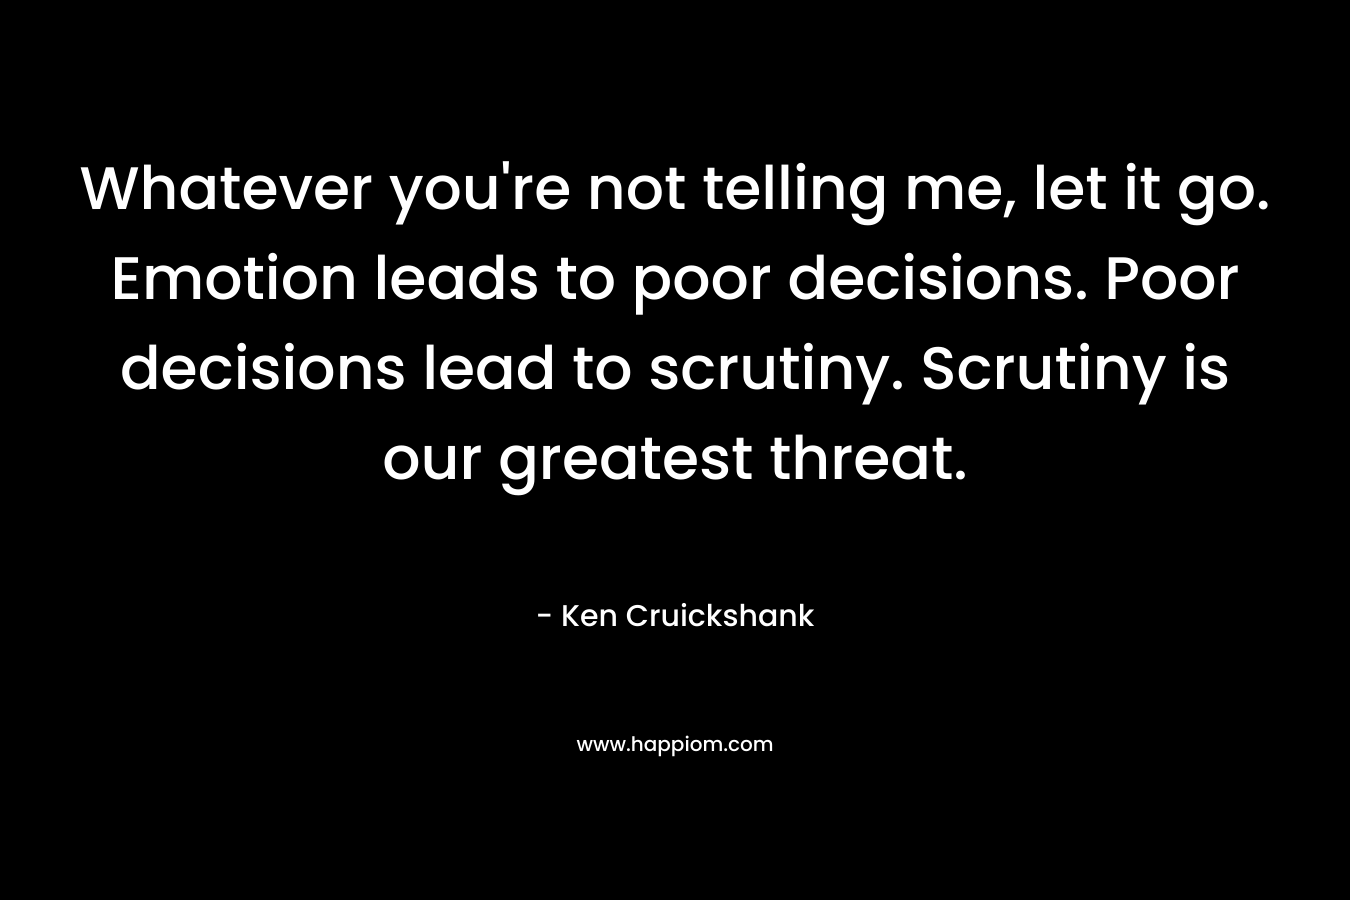 Whatever you’re not telling me, let it go. Emotion leads to poor decisions. Poor decisions lead to scrutiny. Scrutiny is our greatest threat. – Ken Cruickshank